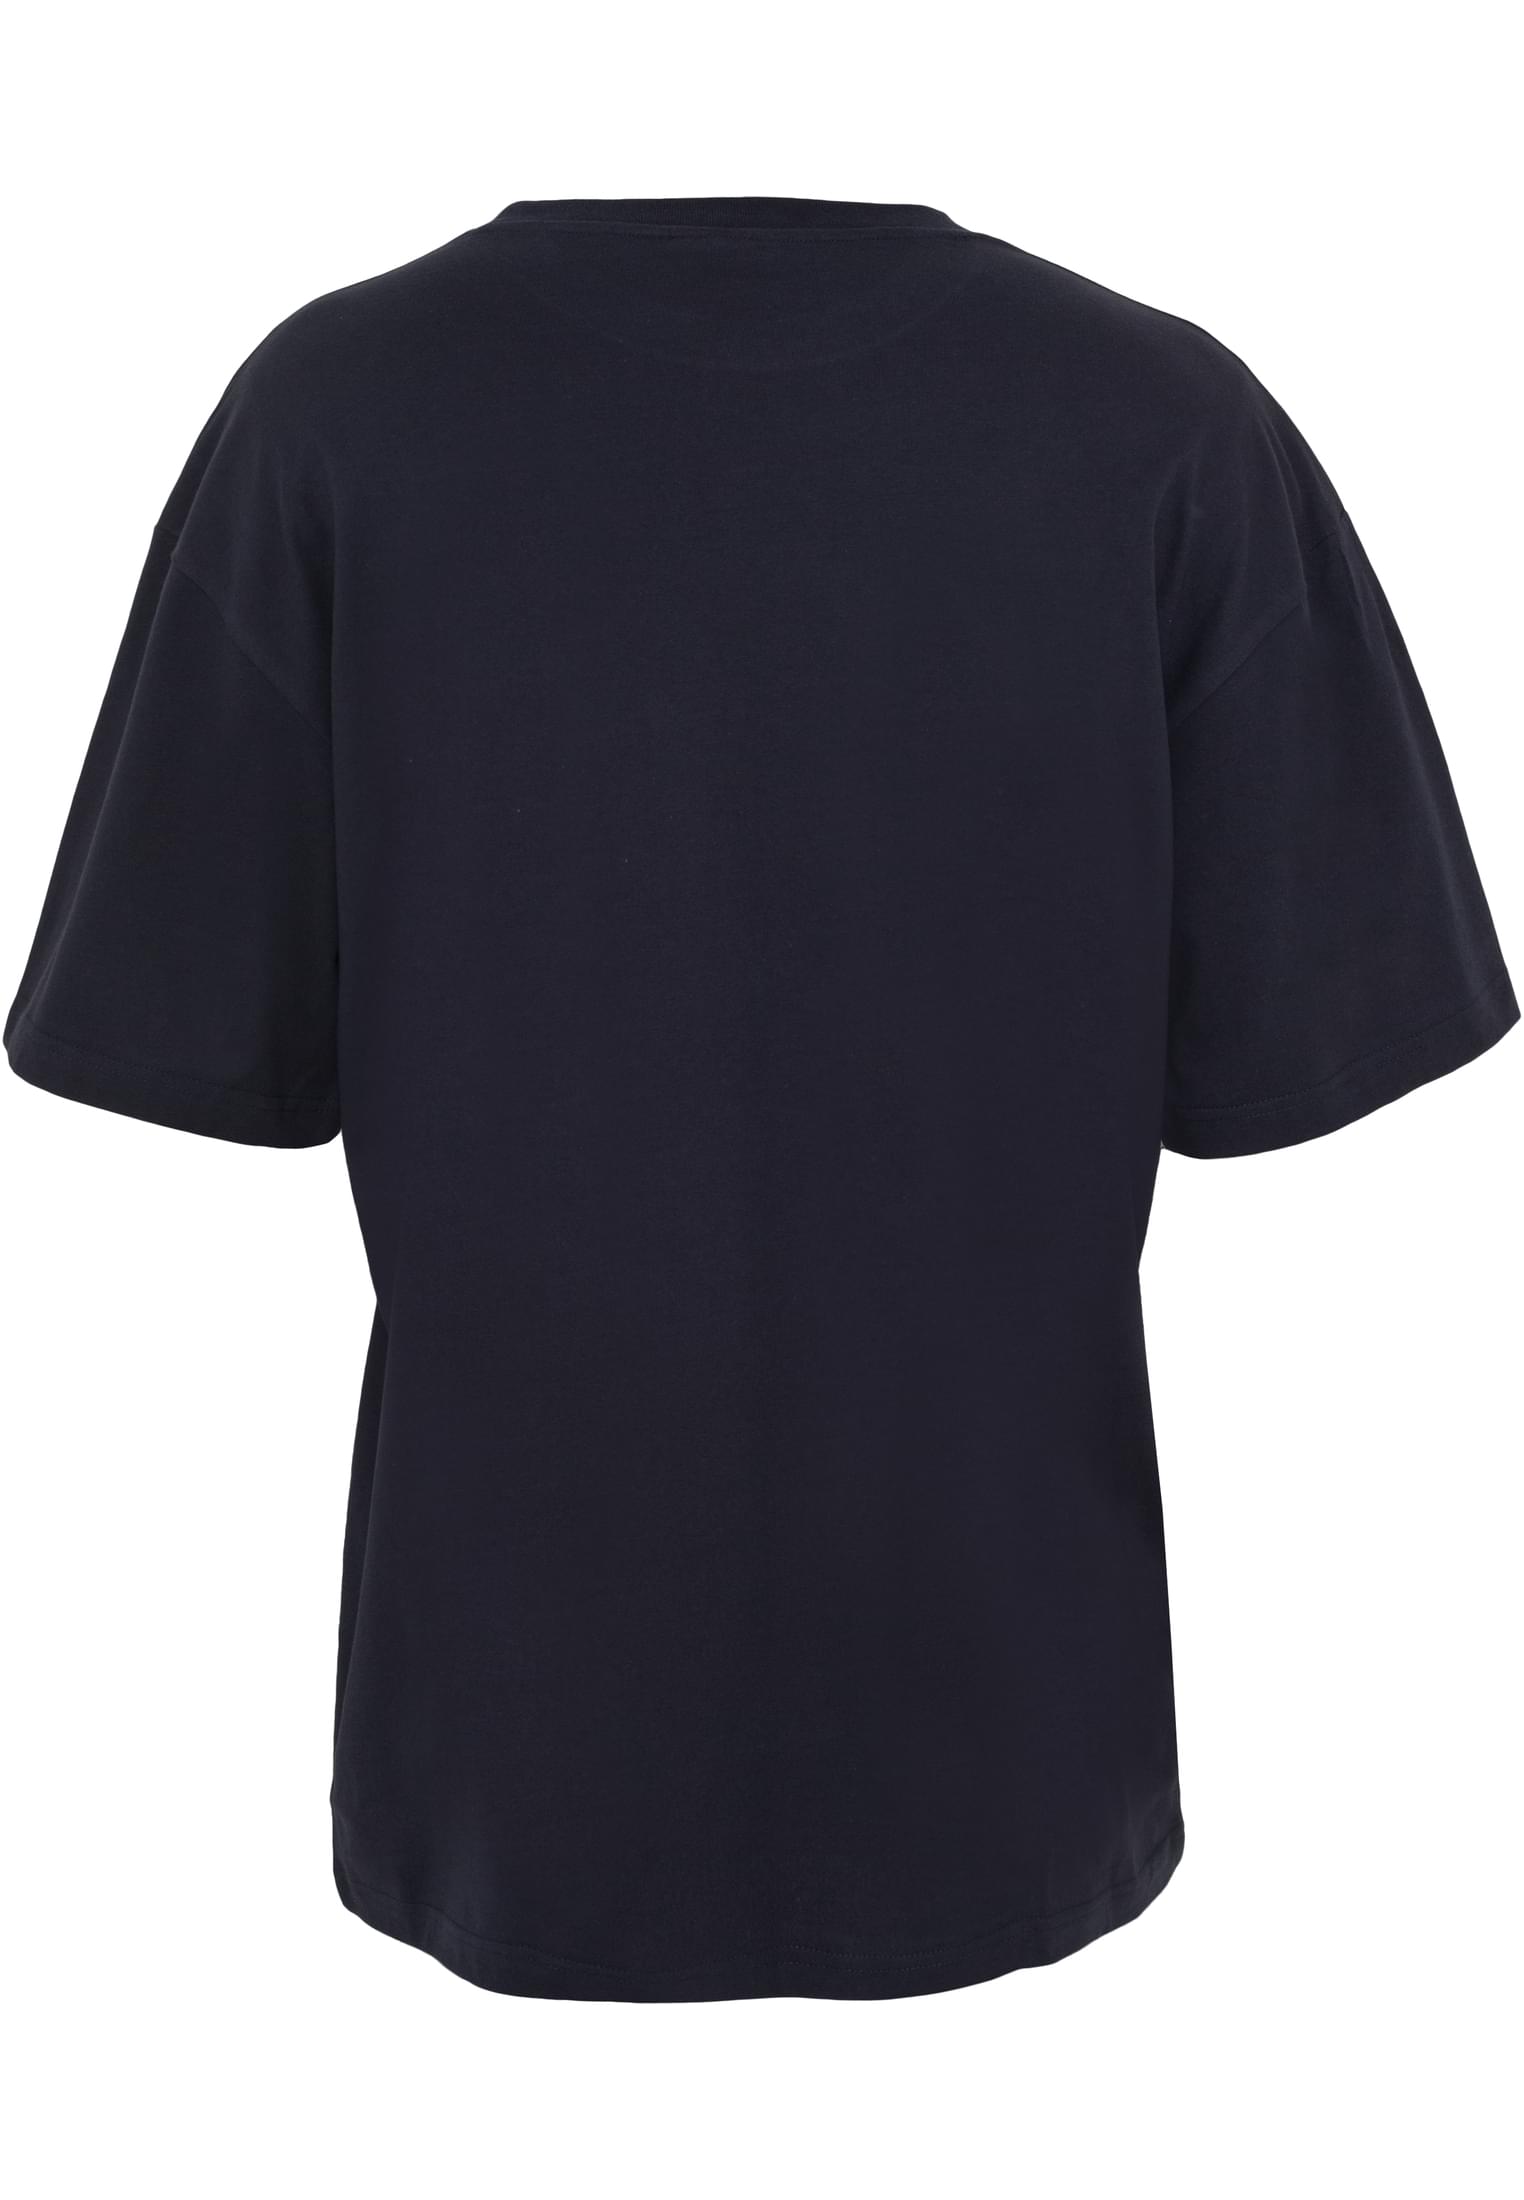 Plus Size Tall Tee in Farbe navy